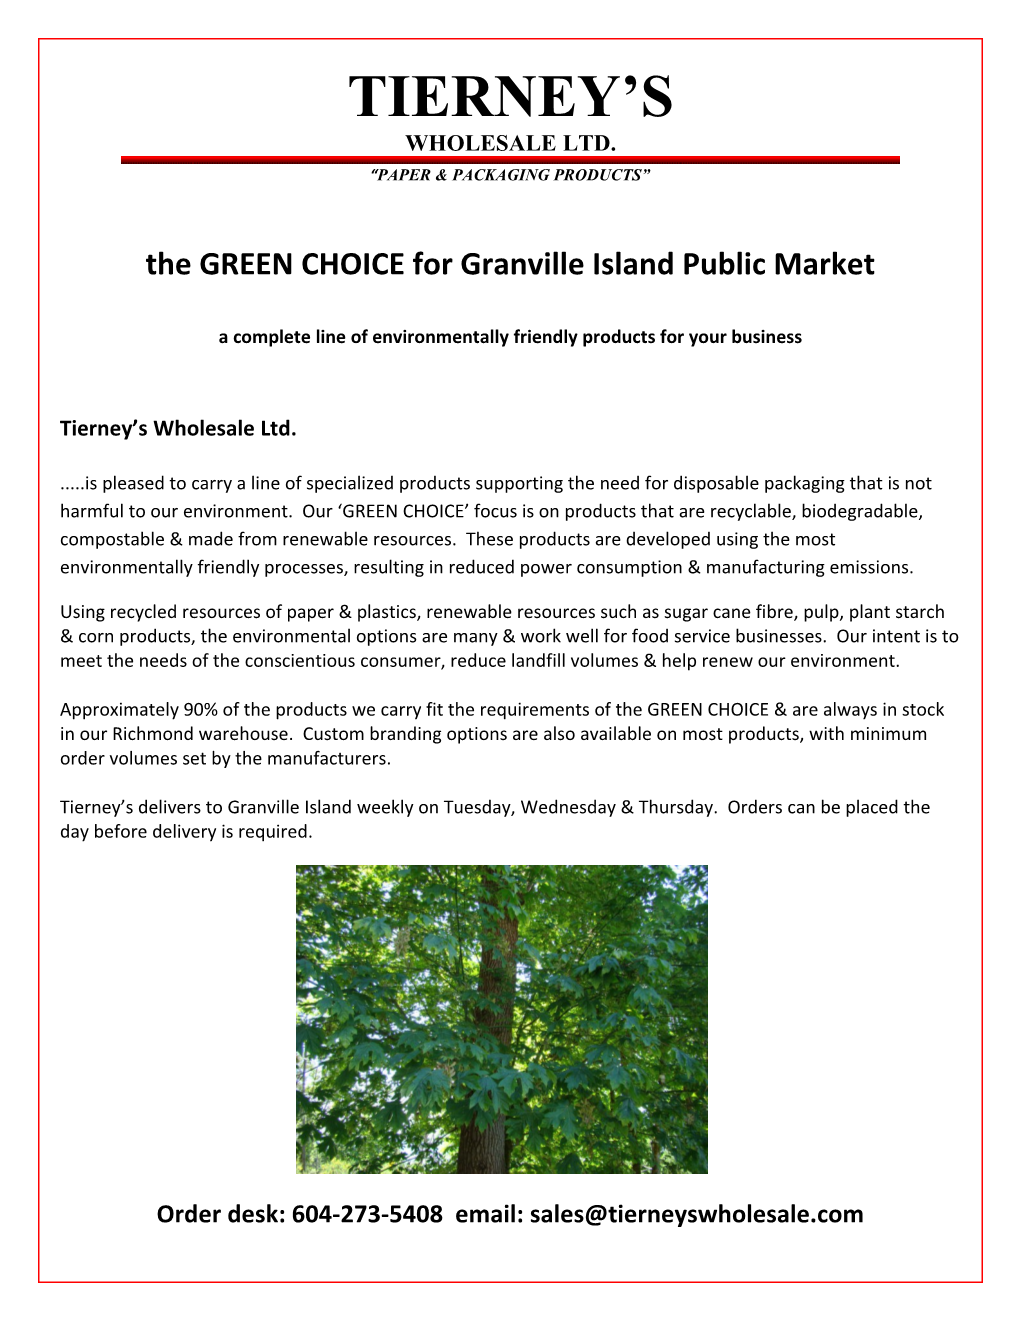 The GREEN CHOICE for Granville Island Public Market